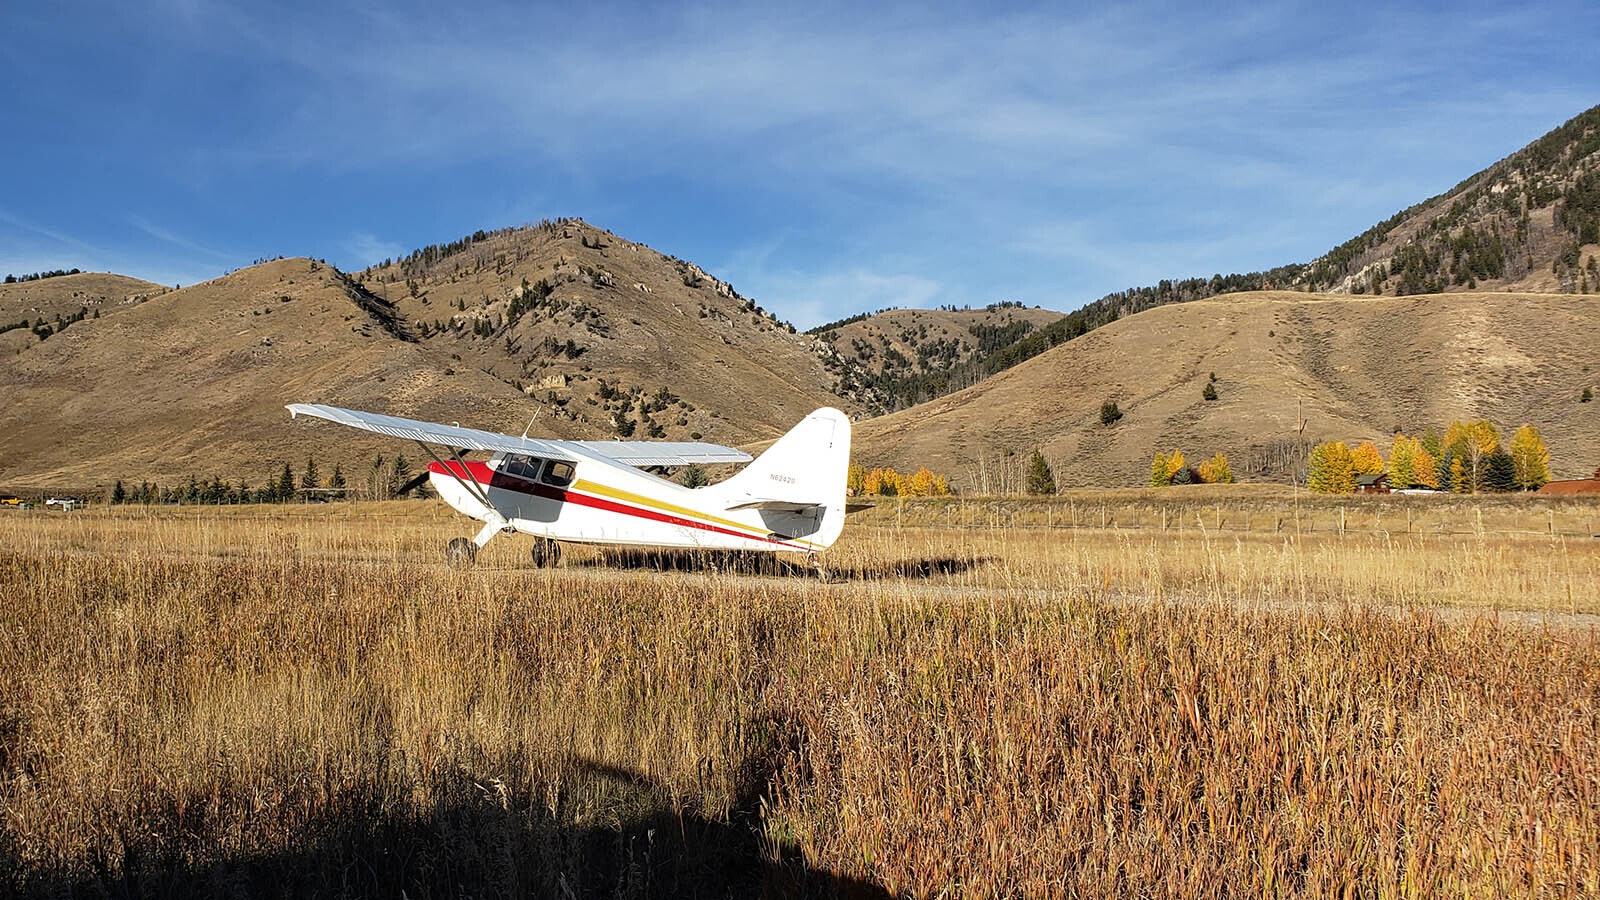 Just after touching down on a dirt airstrip at Melody Ranch International in Jackson Hole.